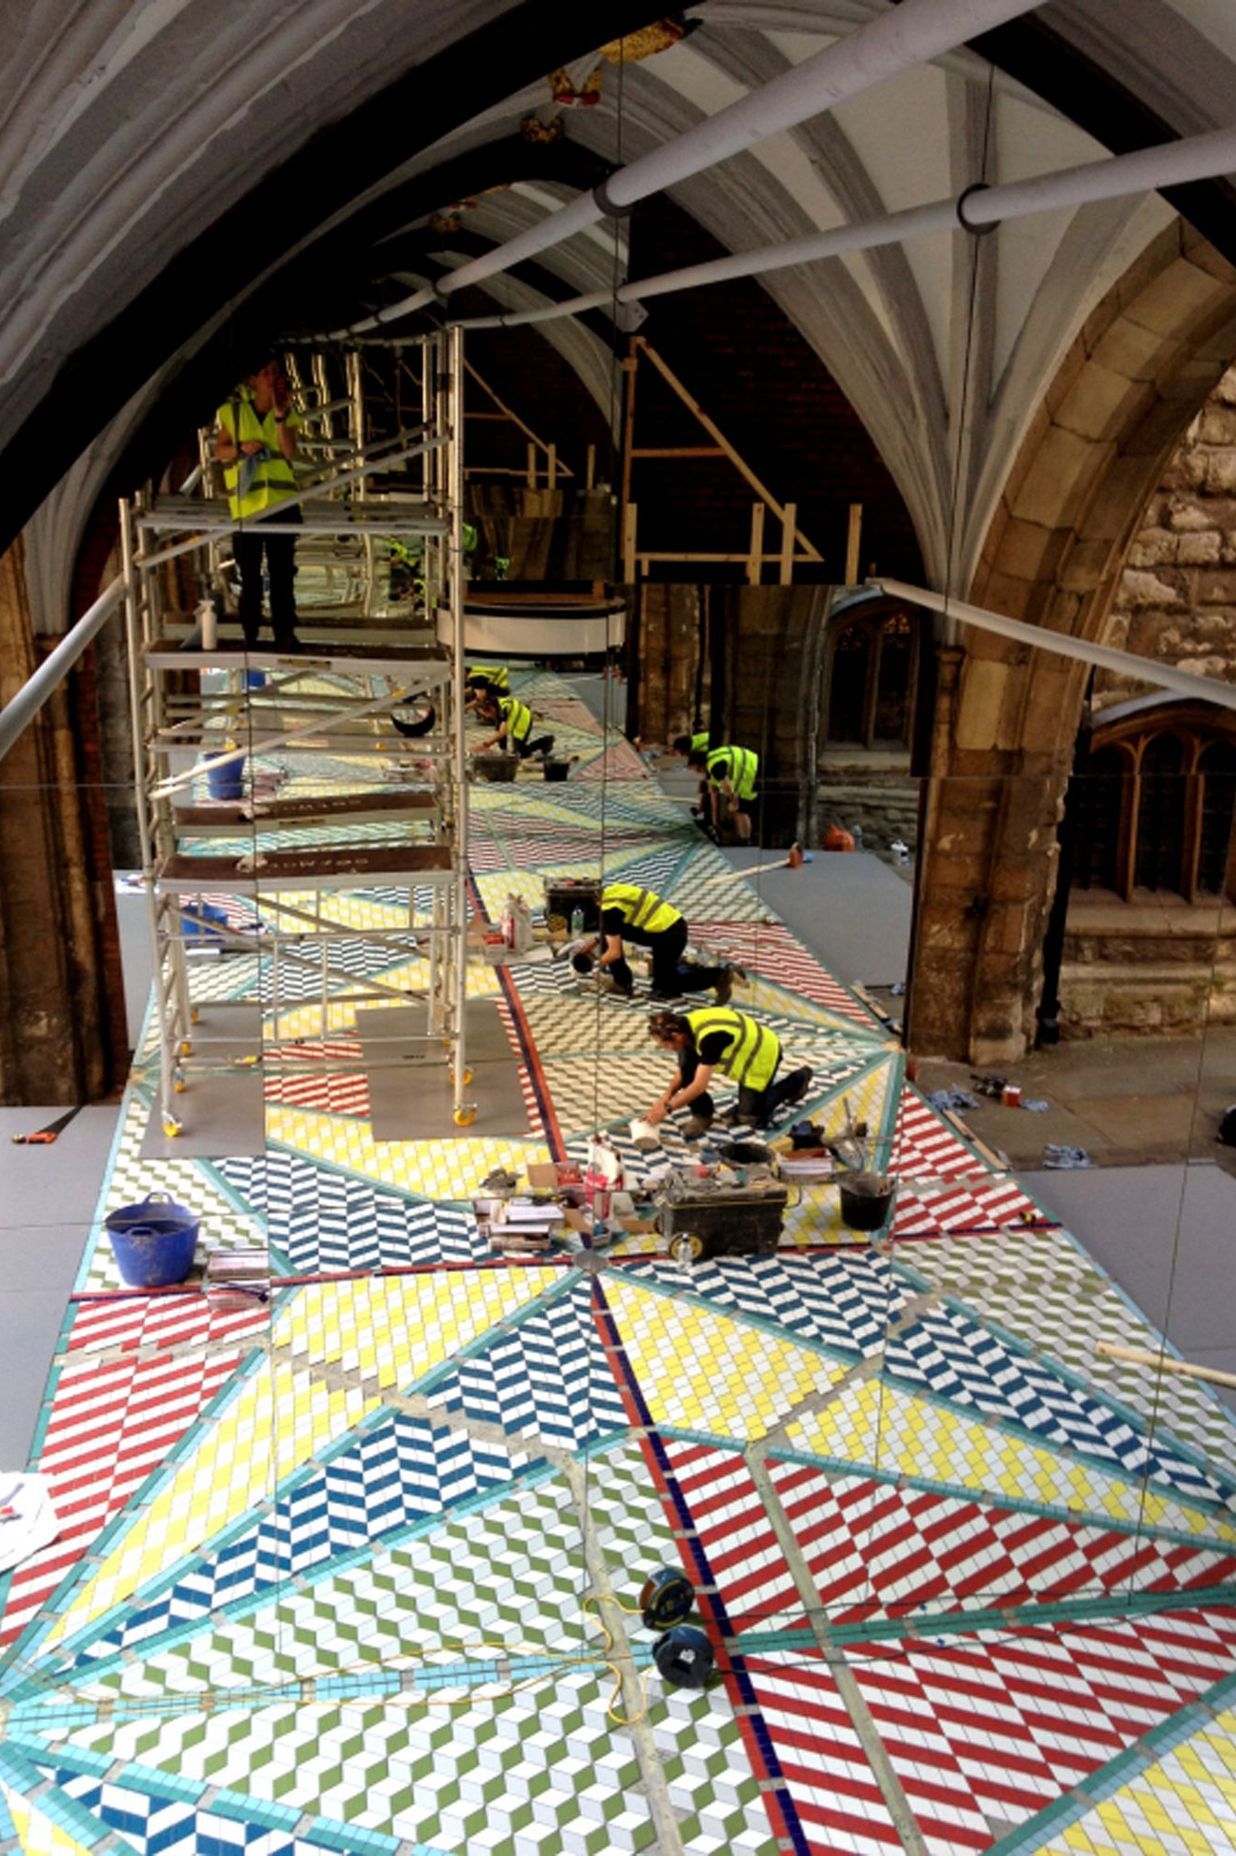 Final site install ongoing at the medieval St. John's Gate